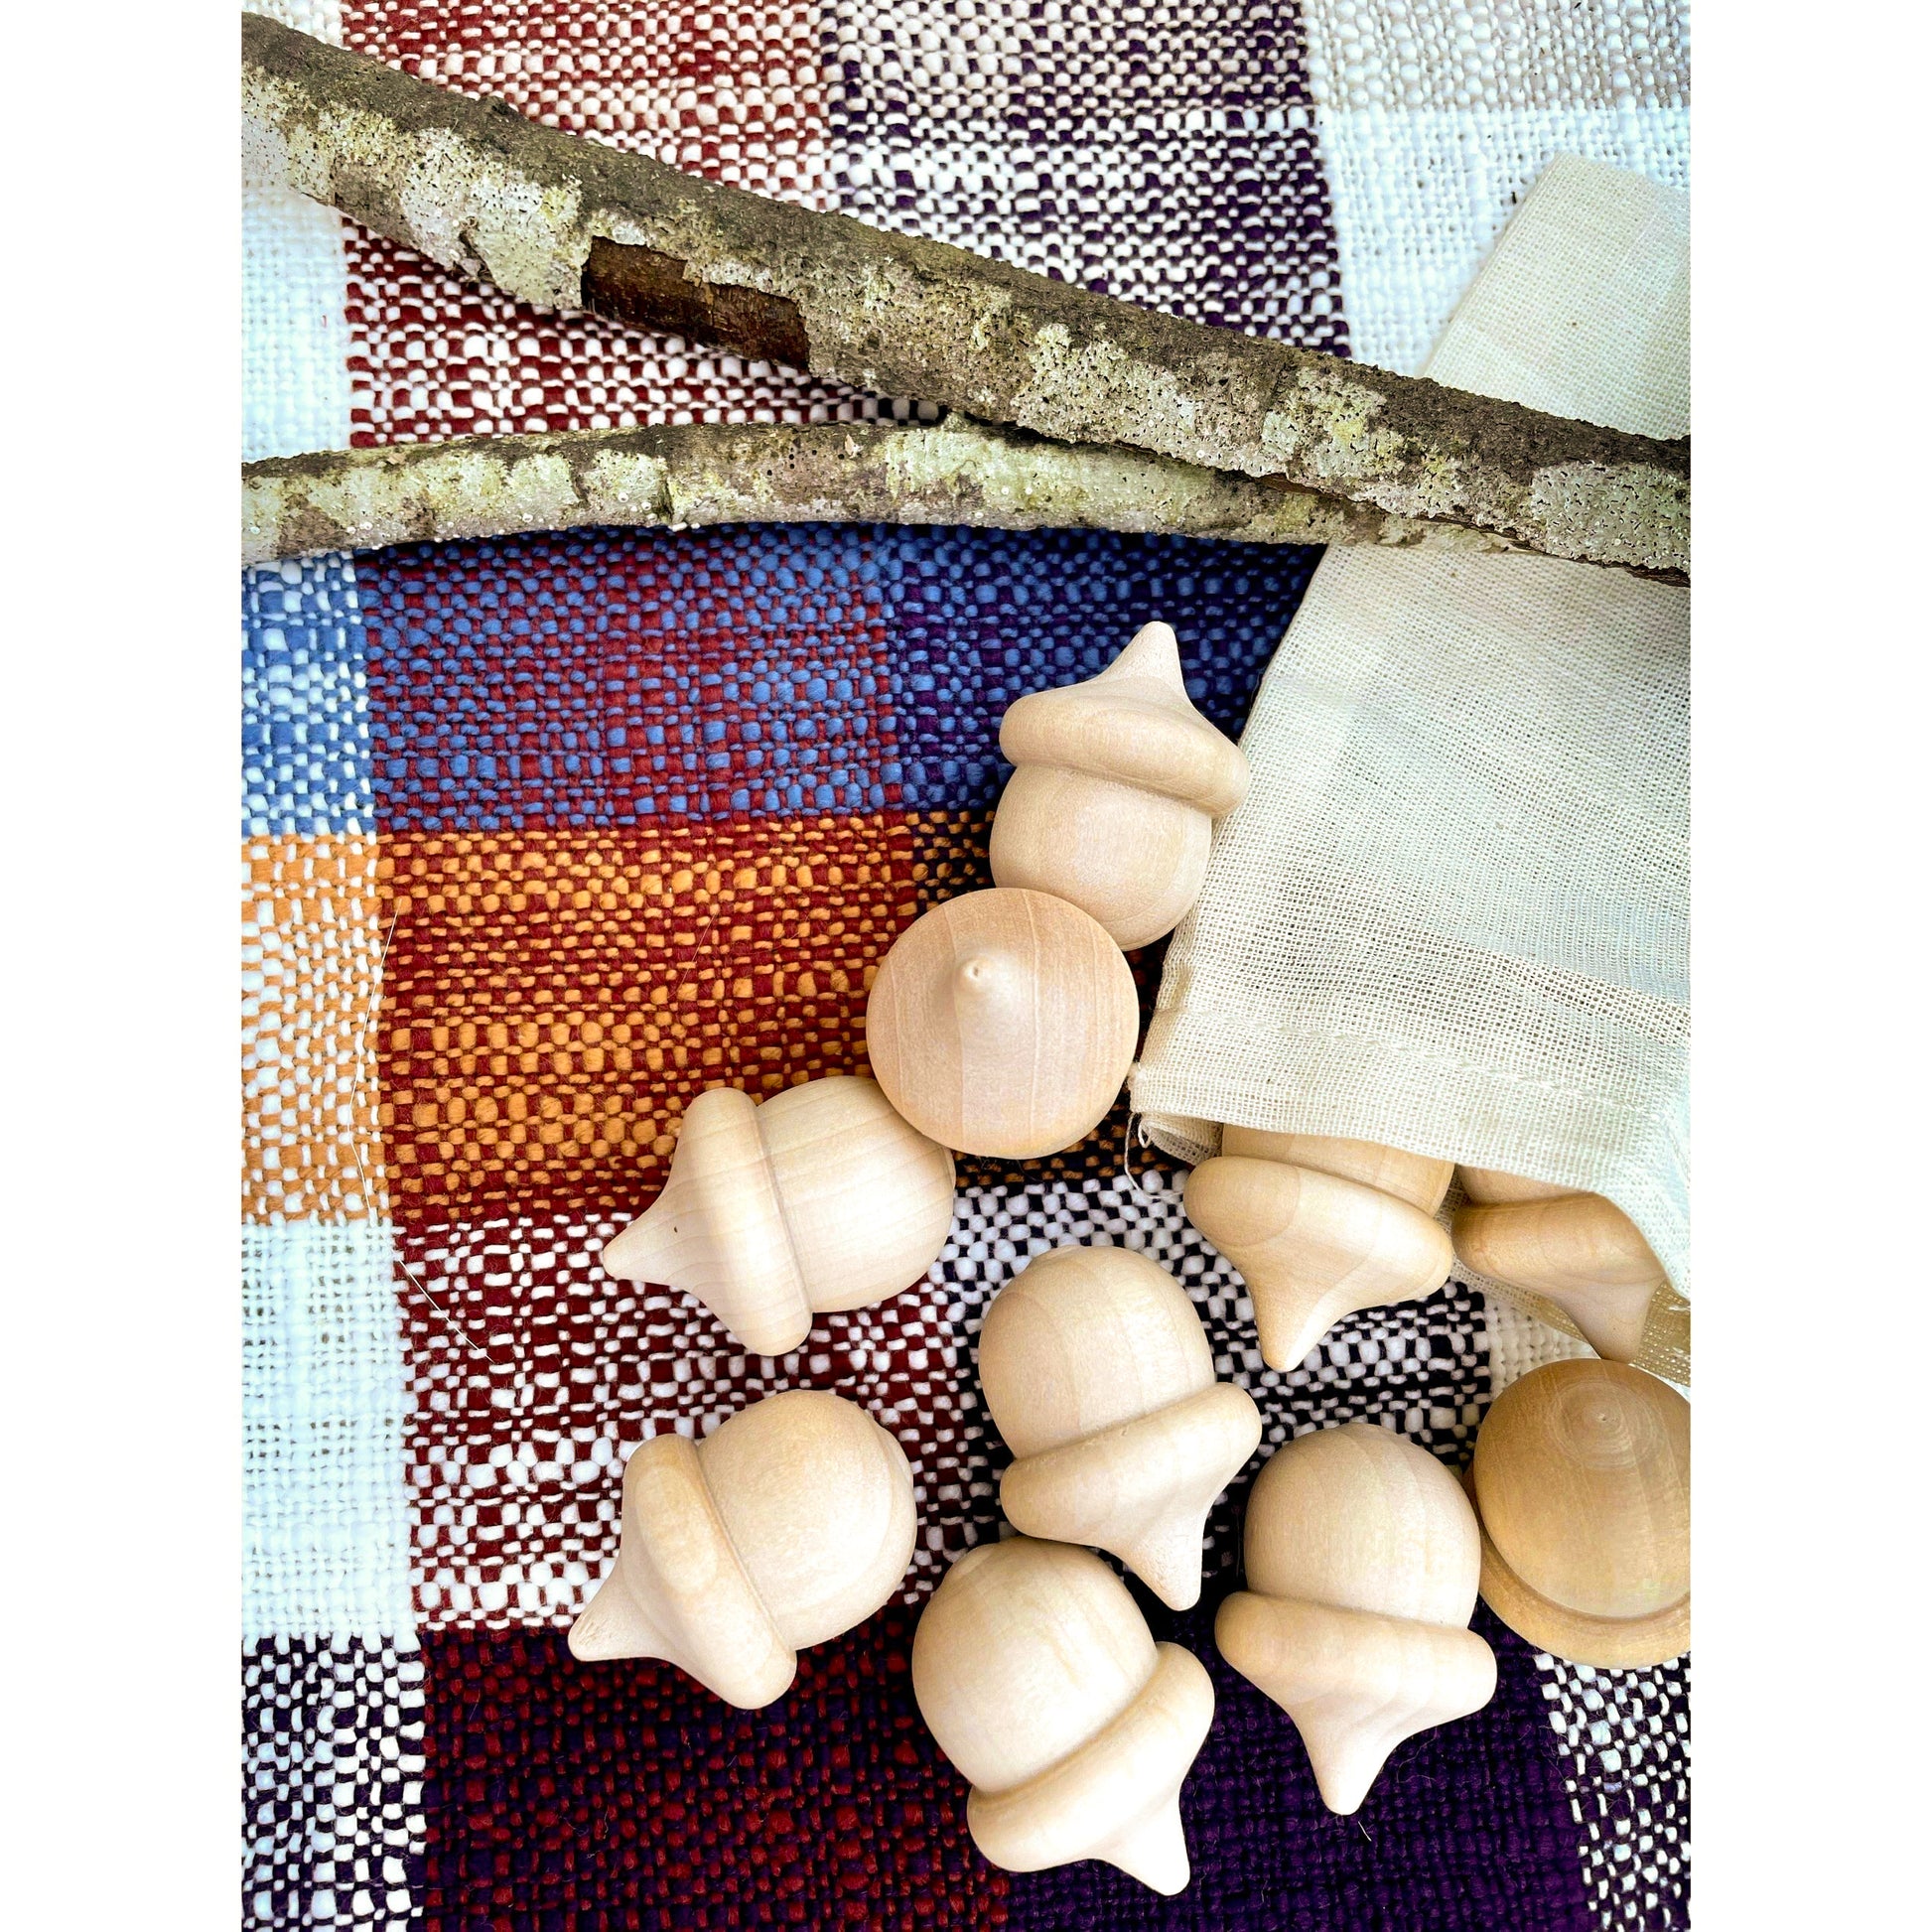 Wooden Acorn Toys or Decor - Sensory Bin or Counting & Sorting - Alder & Alouette